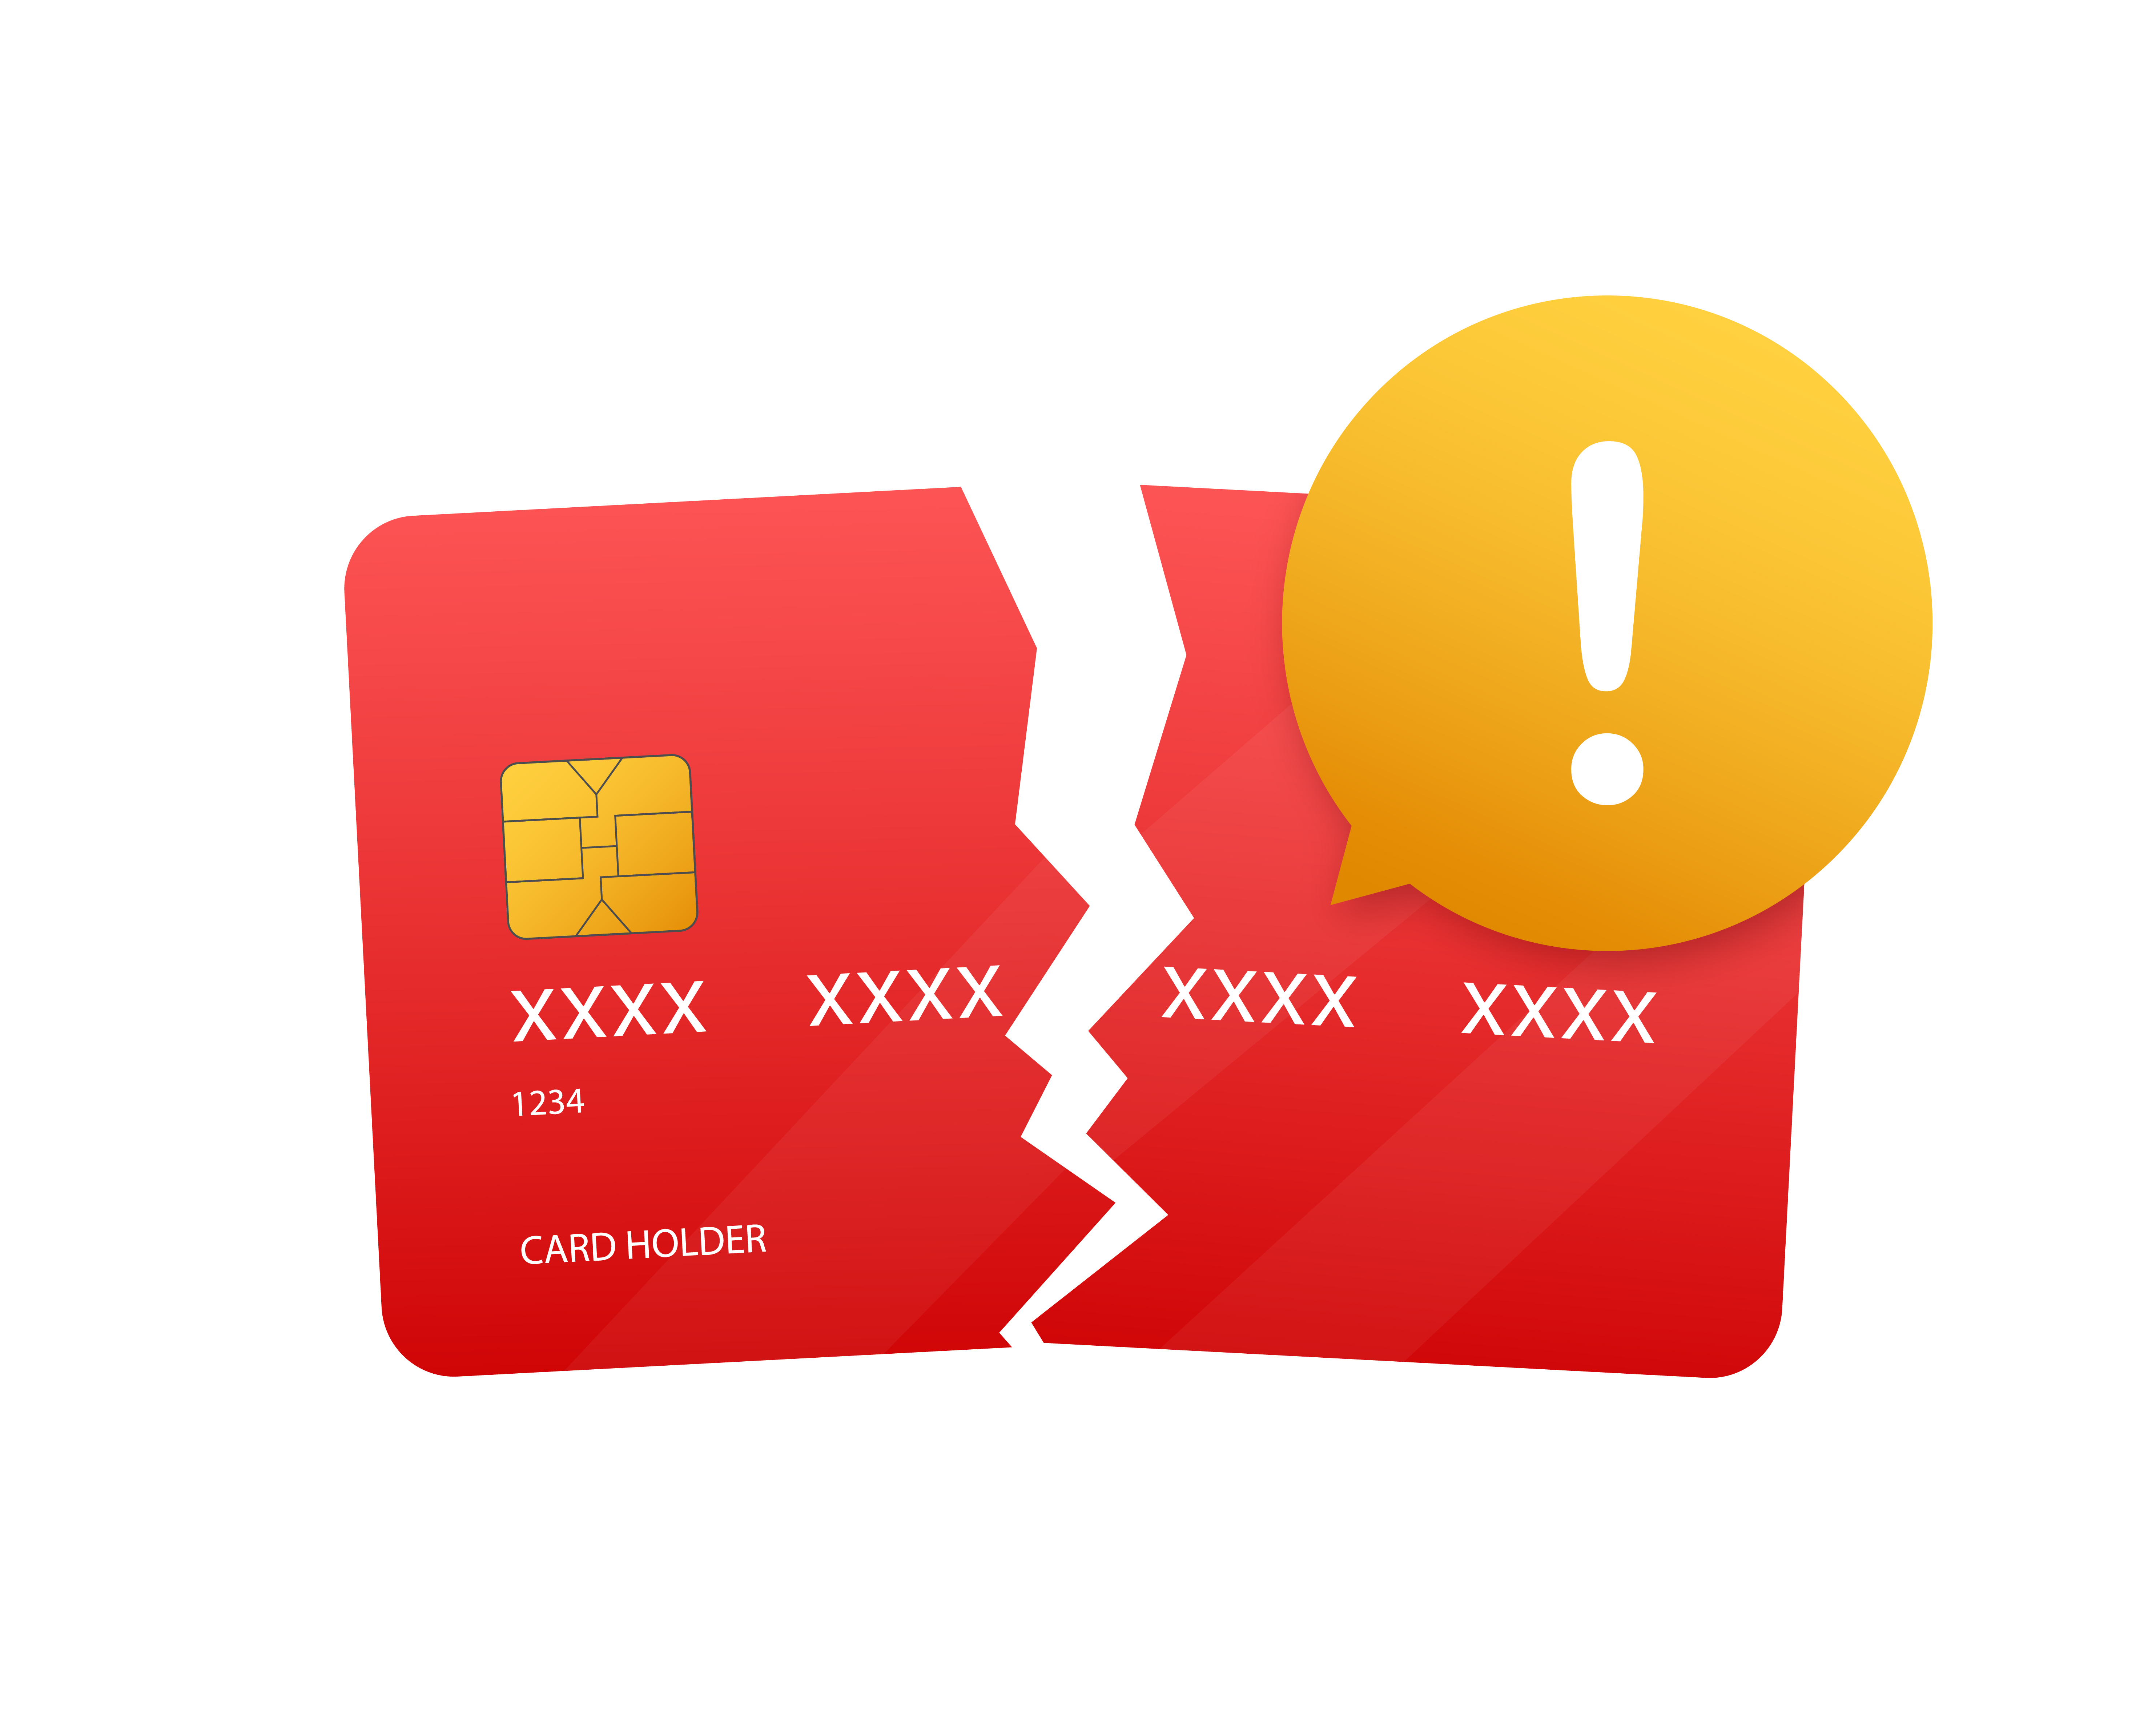 One of the advantages of BECS payments is that payments will be processed even if the customer’s card has expired.